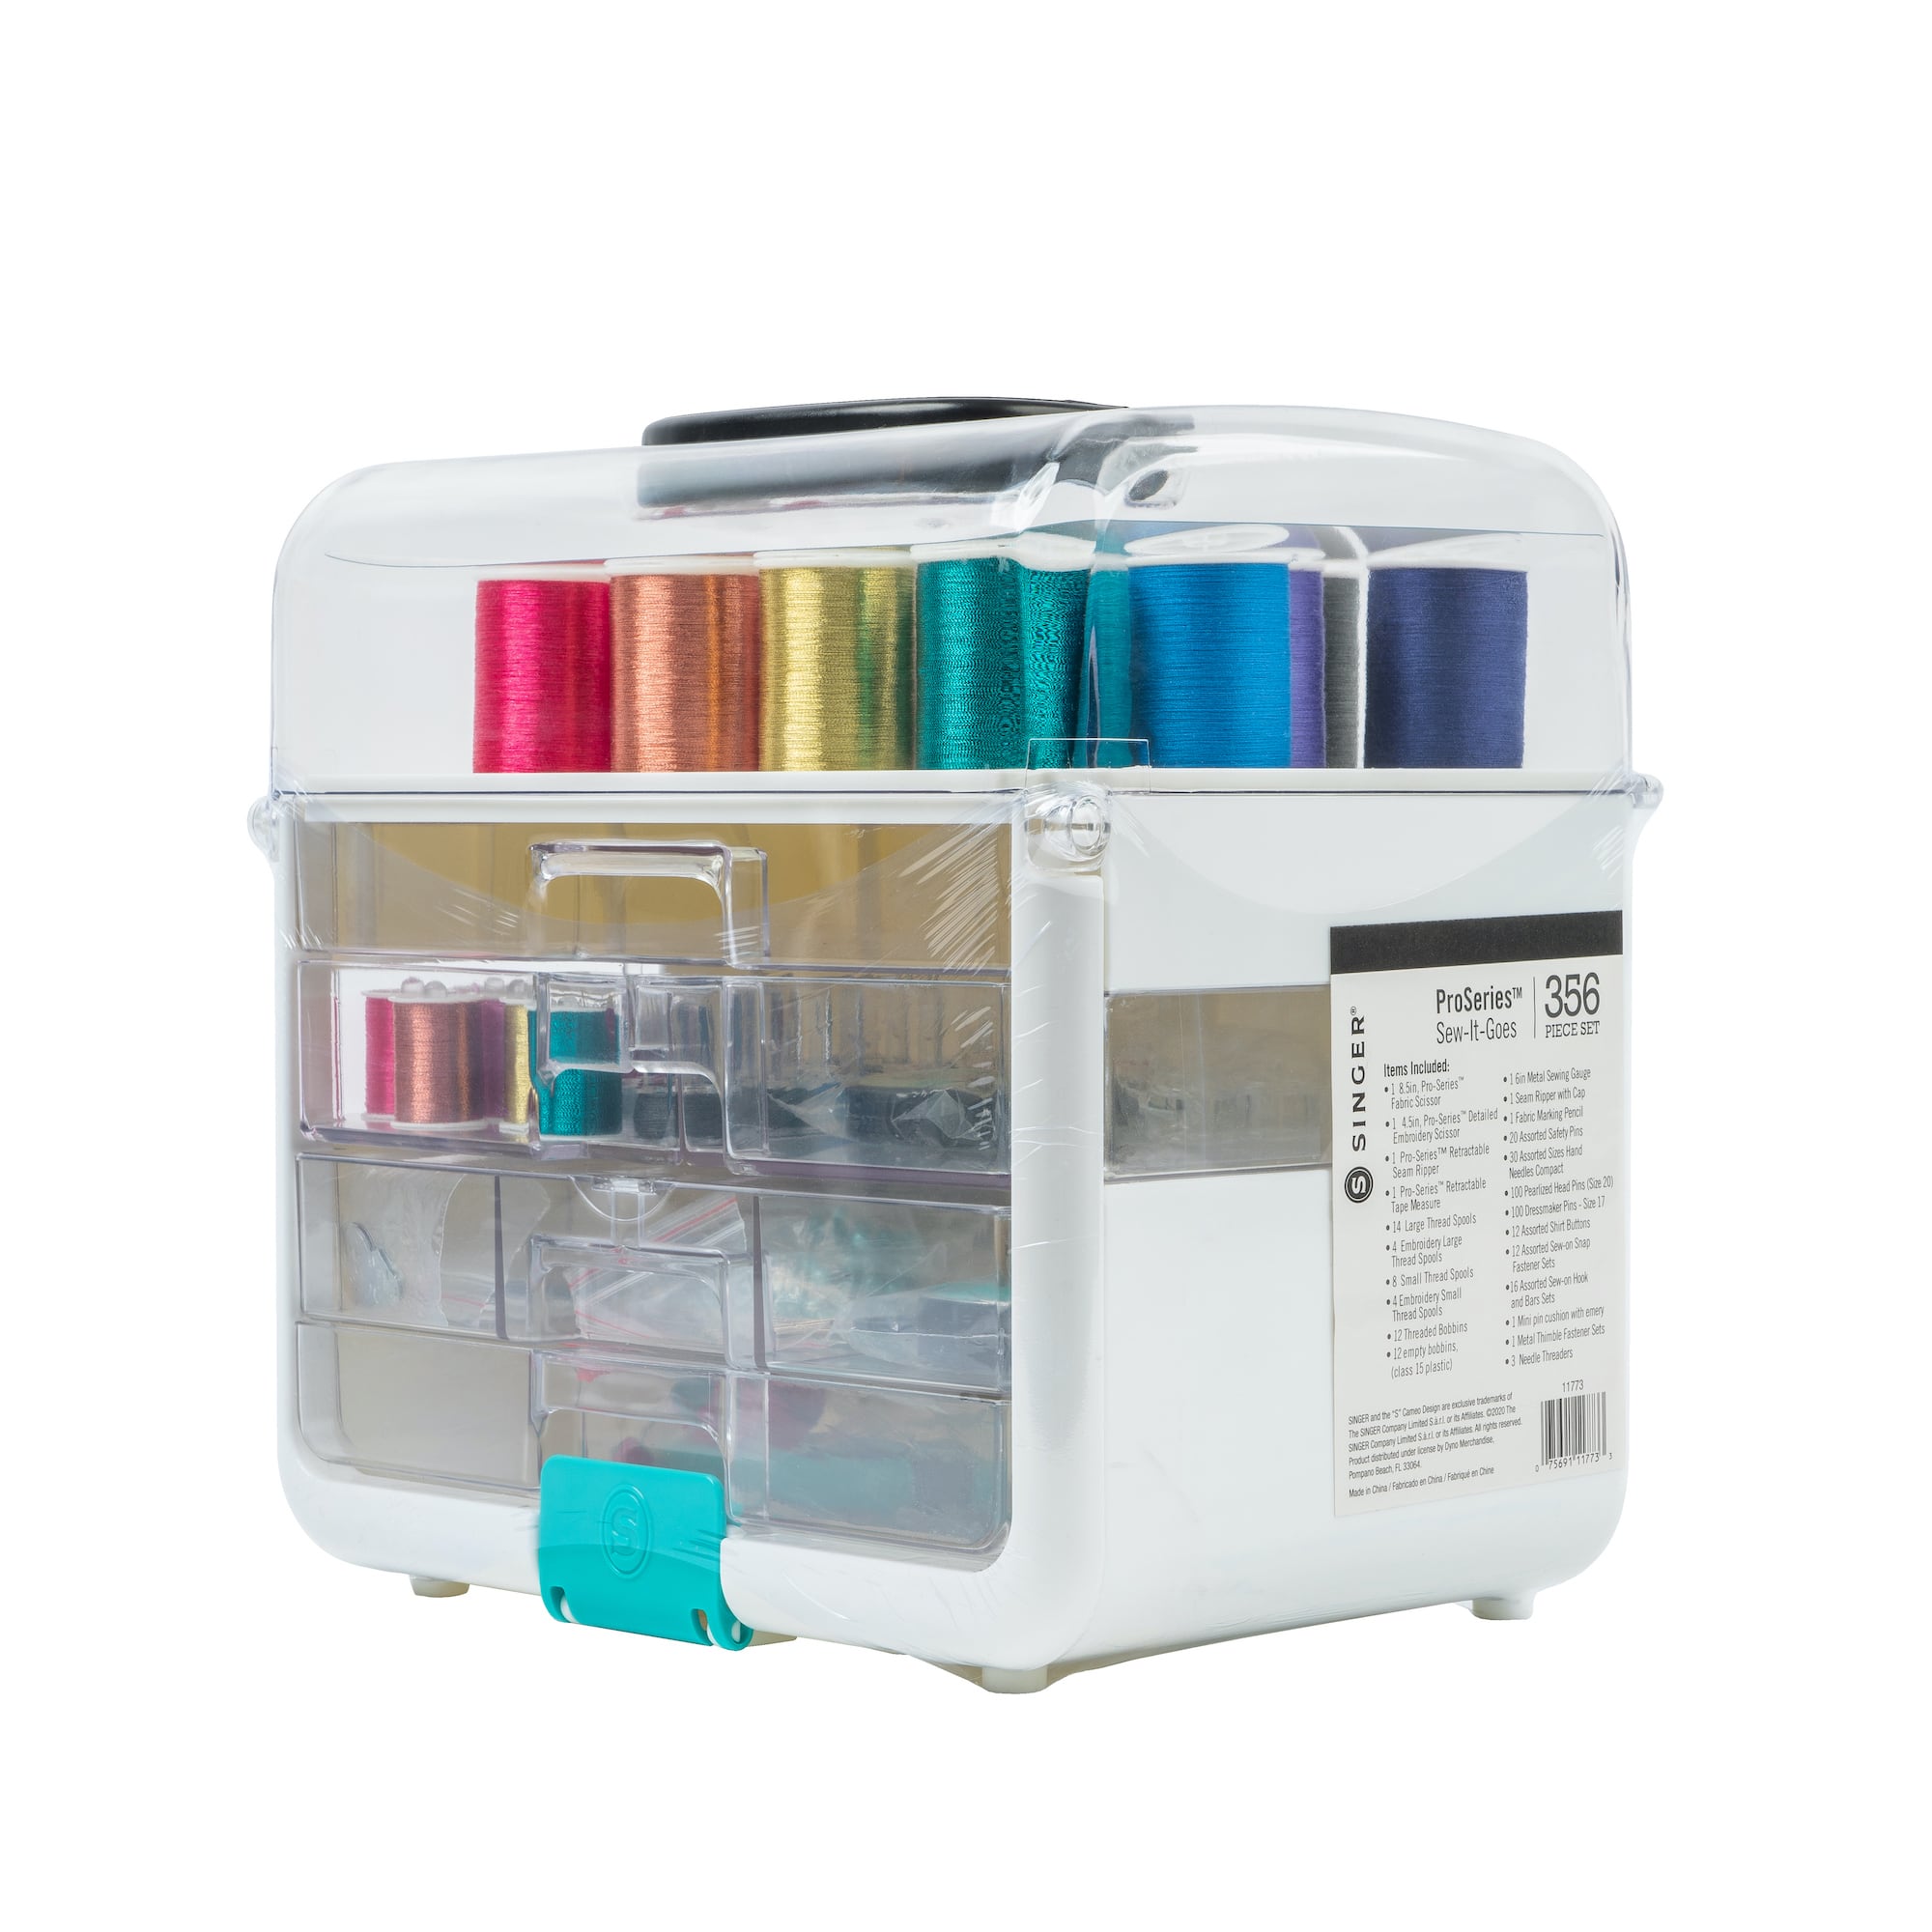 Singer ProSeries Sew-It-Goes 356 Piece Sewing Kit and Storage System